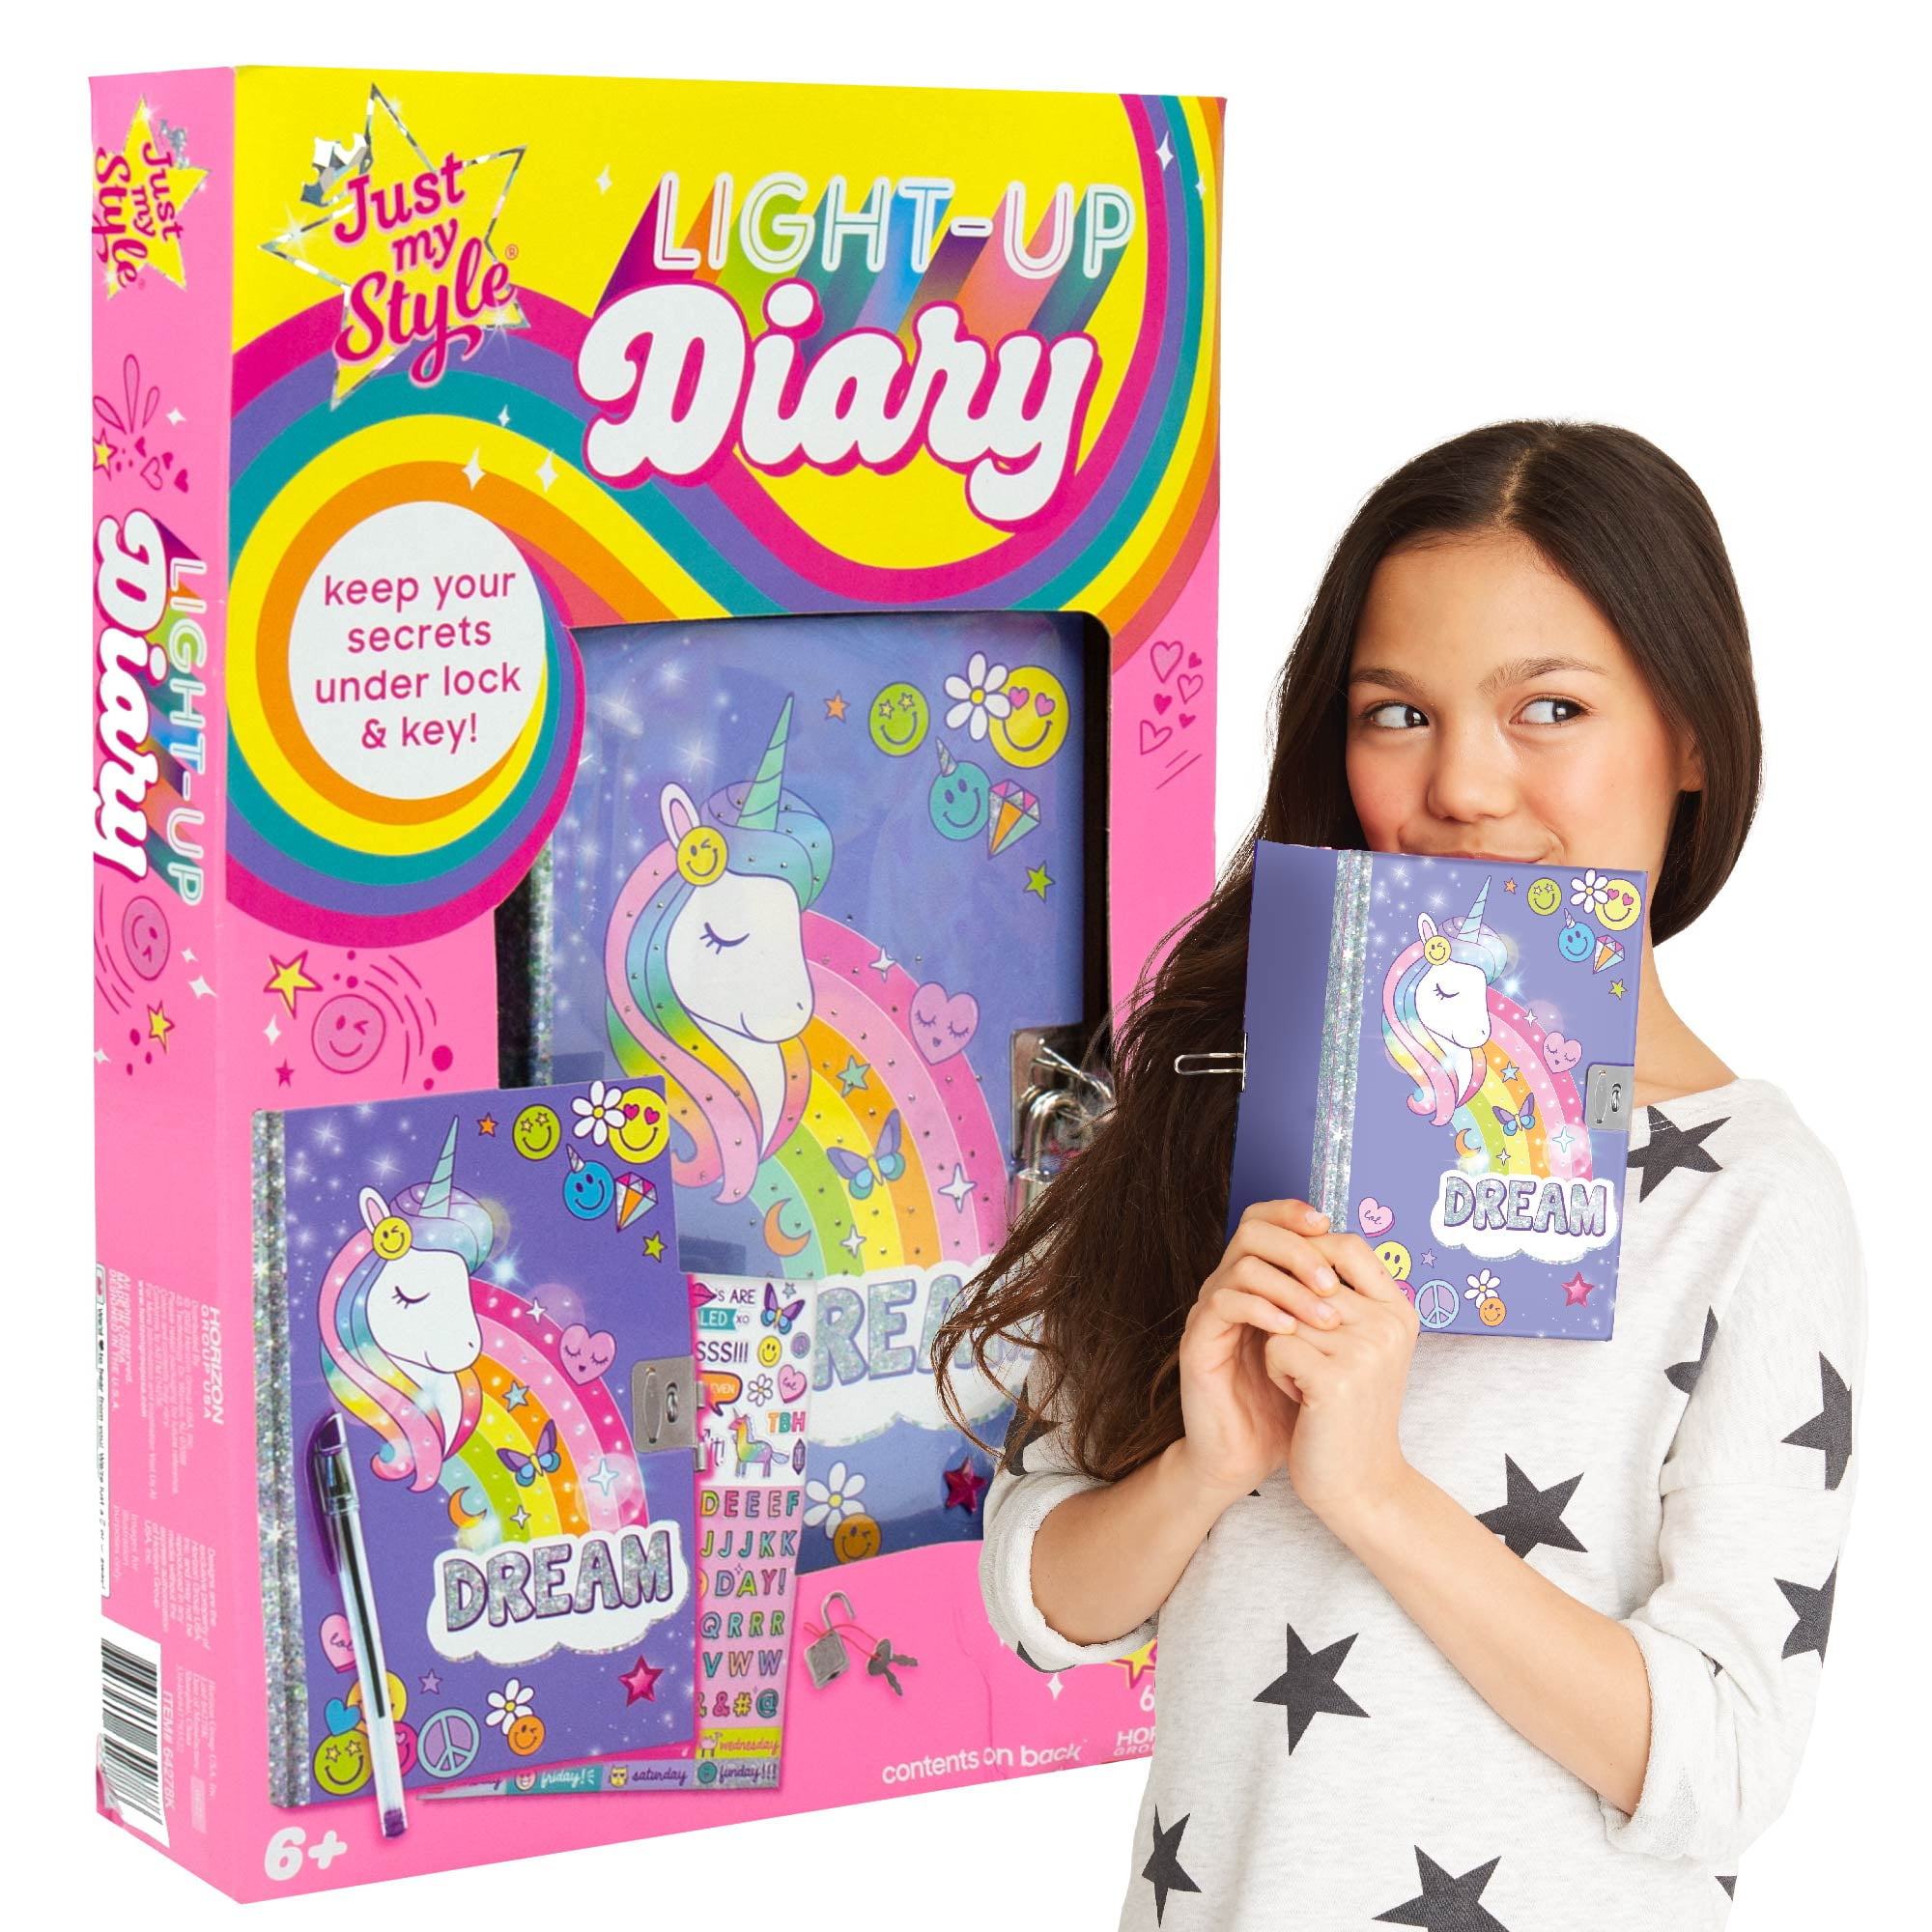 Just My Style Light up Diary